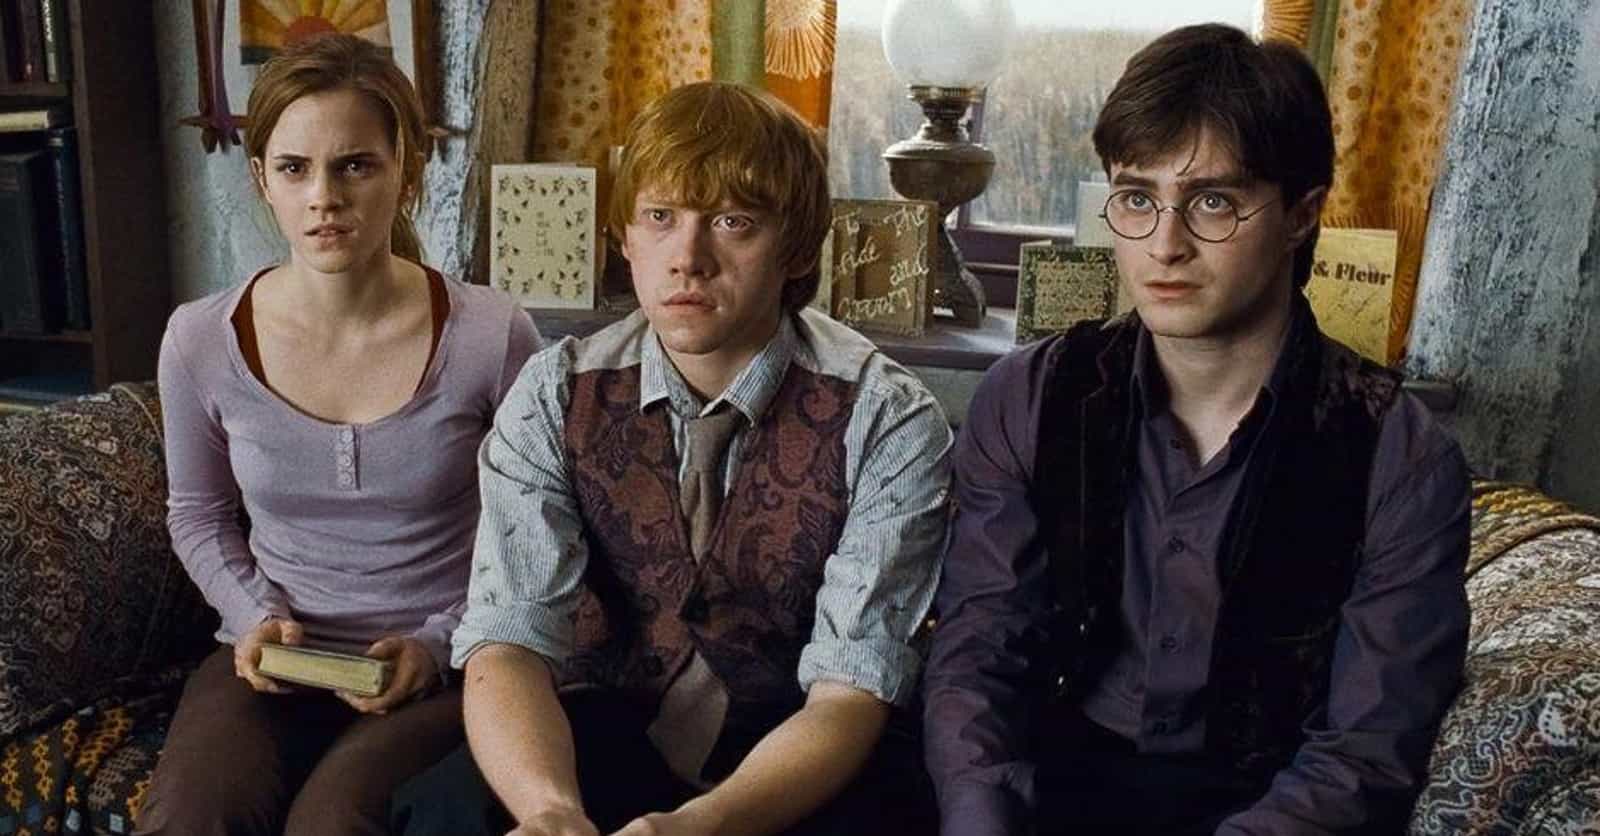 What 'Harry Potter' Cast Members Disliked About Filming The Series